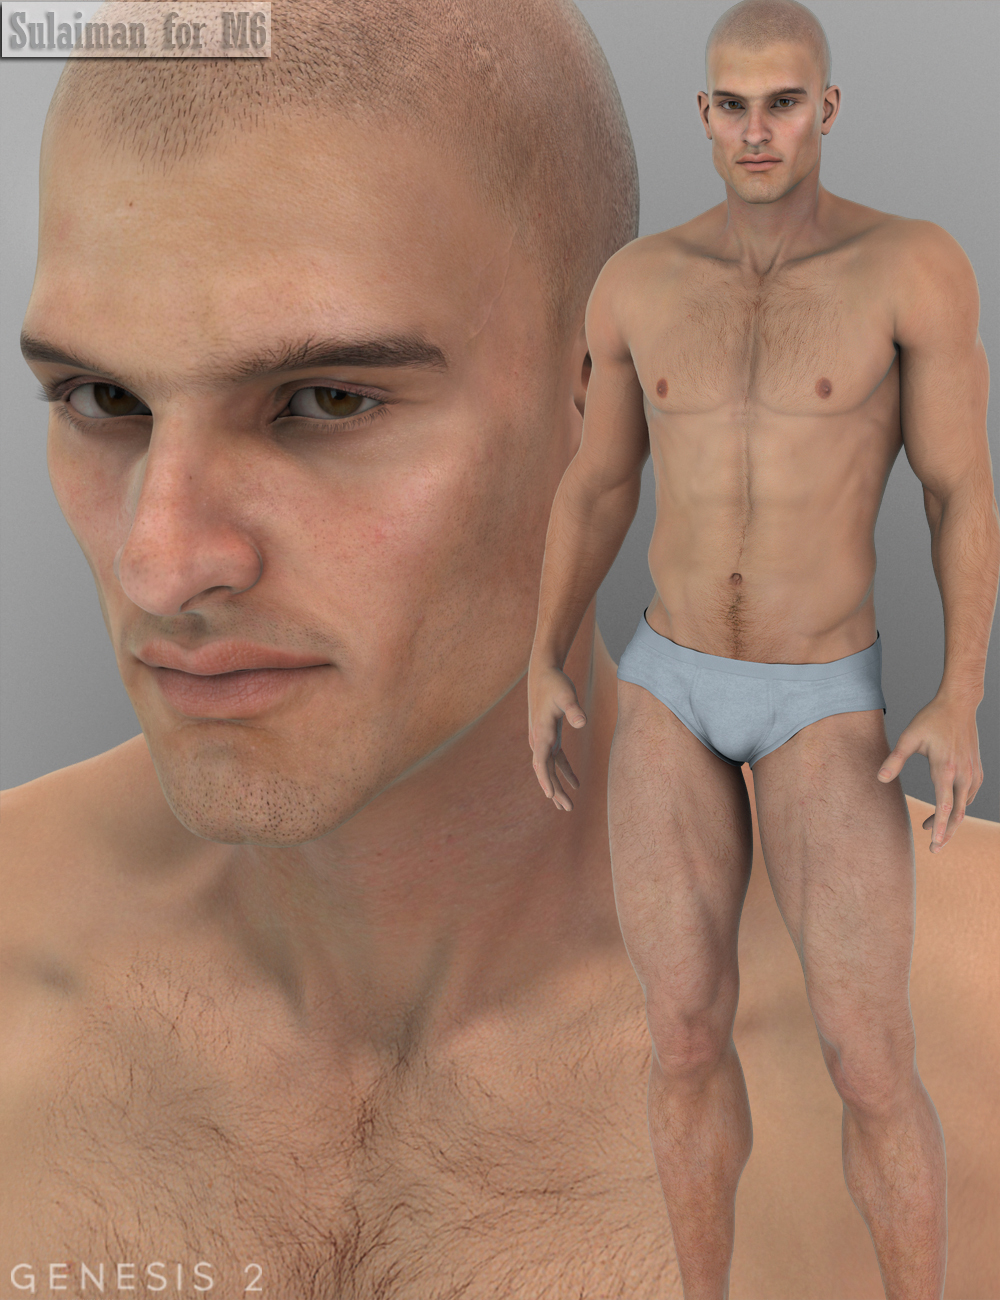 Sulaiman for Michael 6 by: Morris, 3D Models by Daz 3D